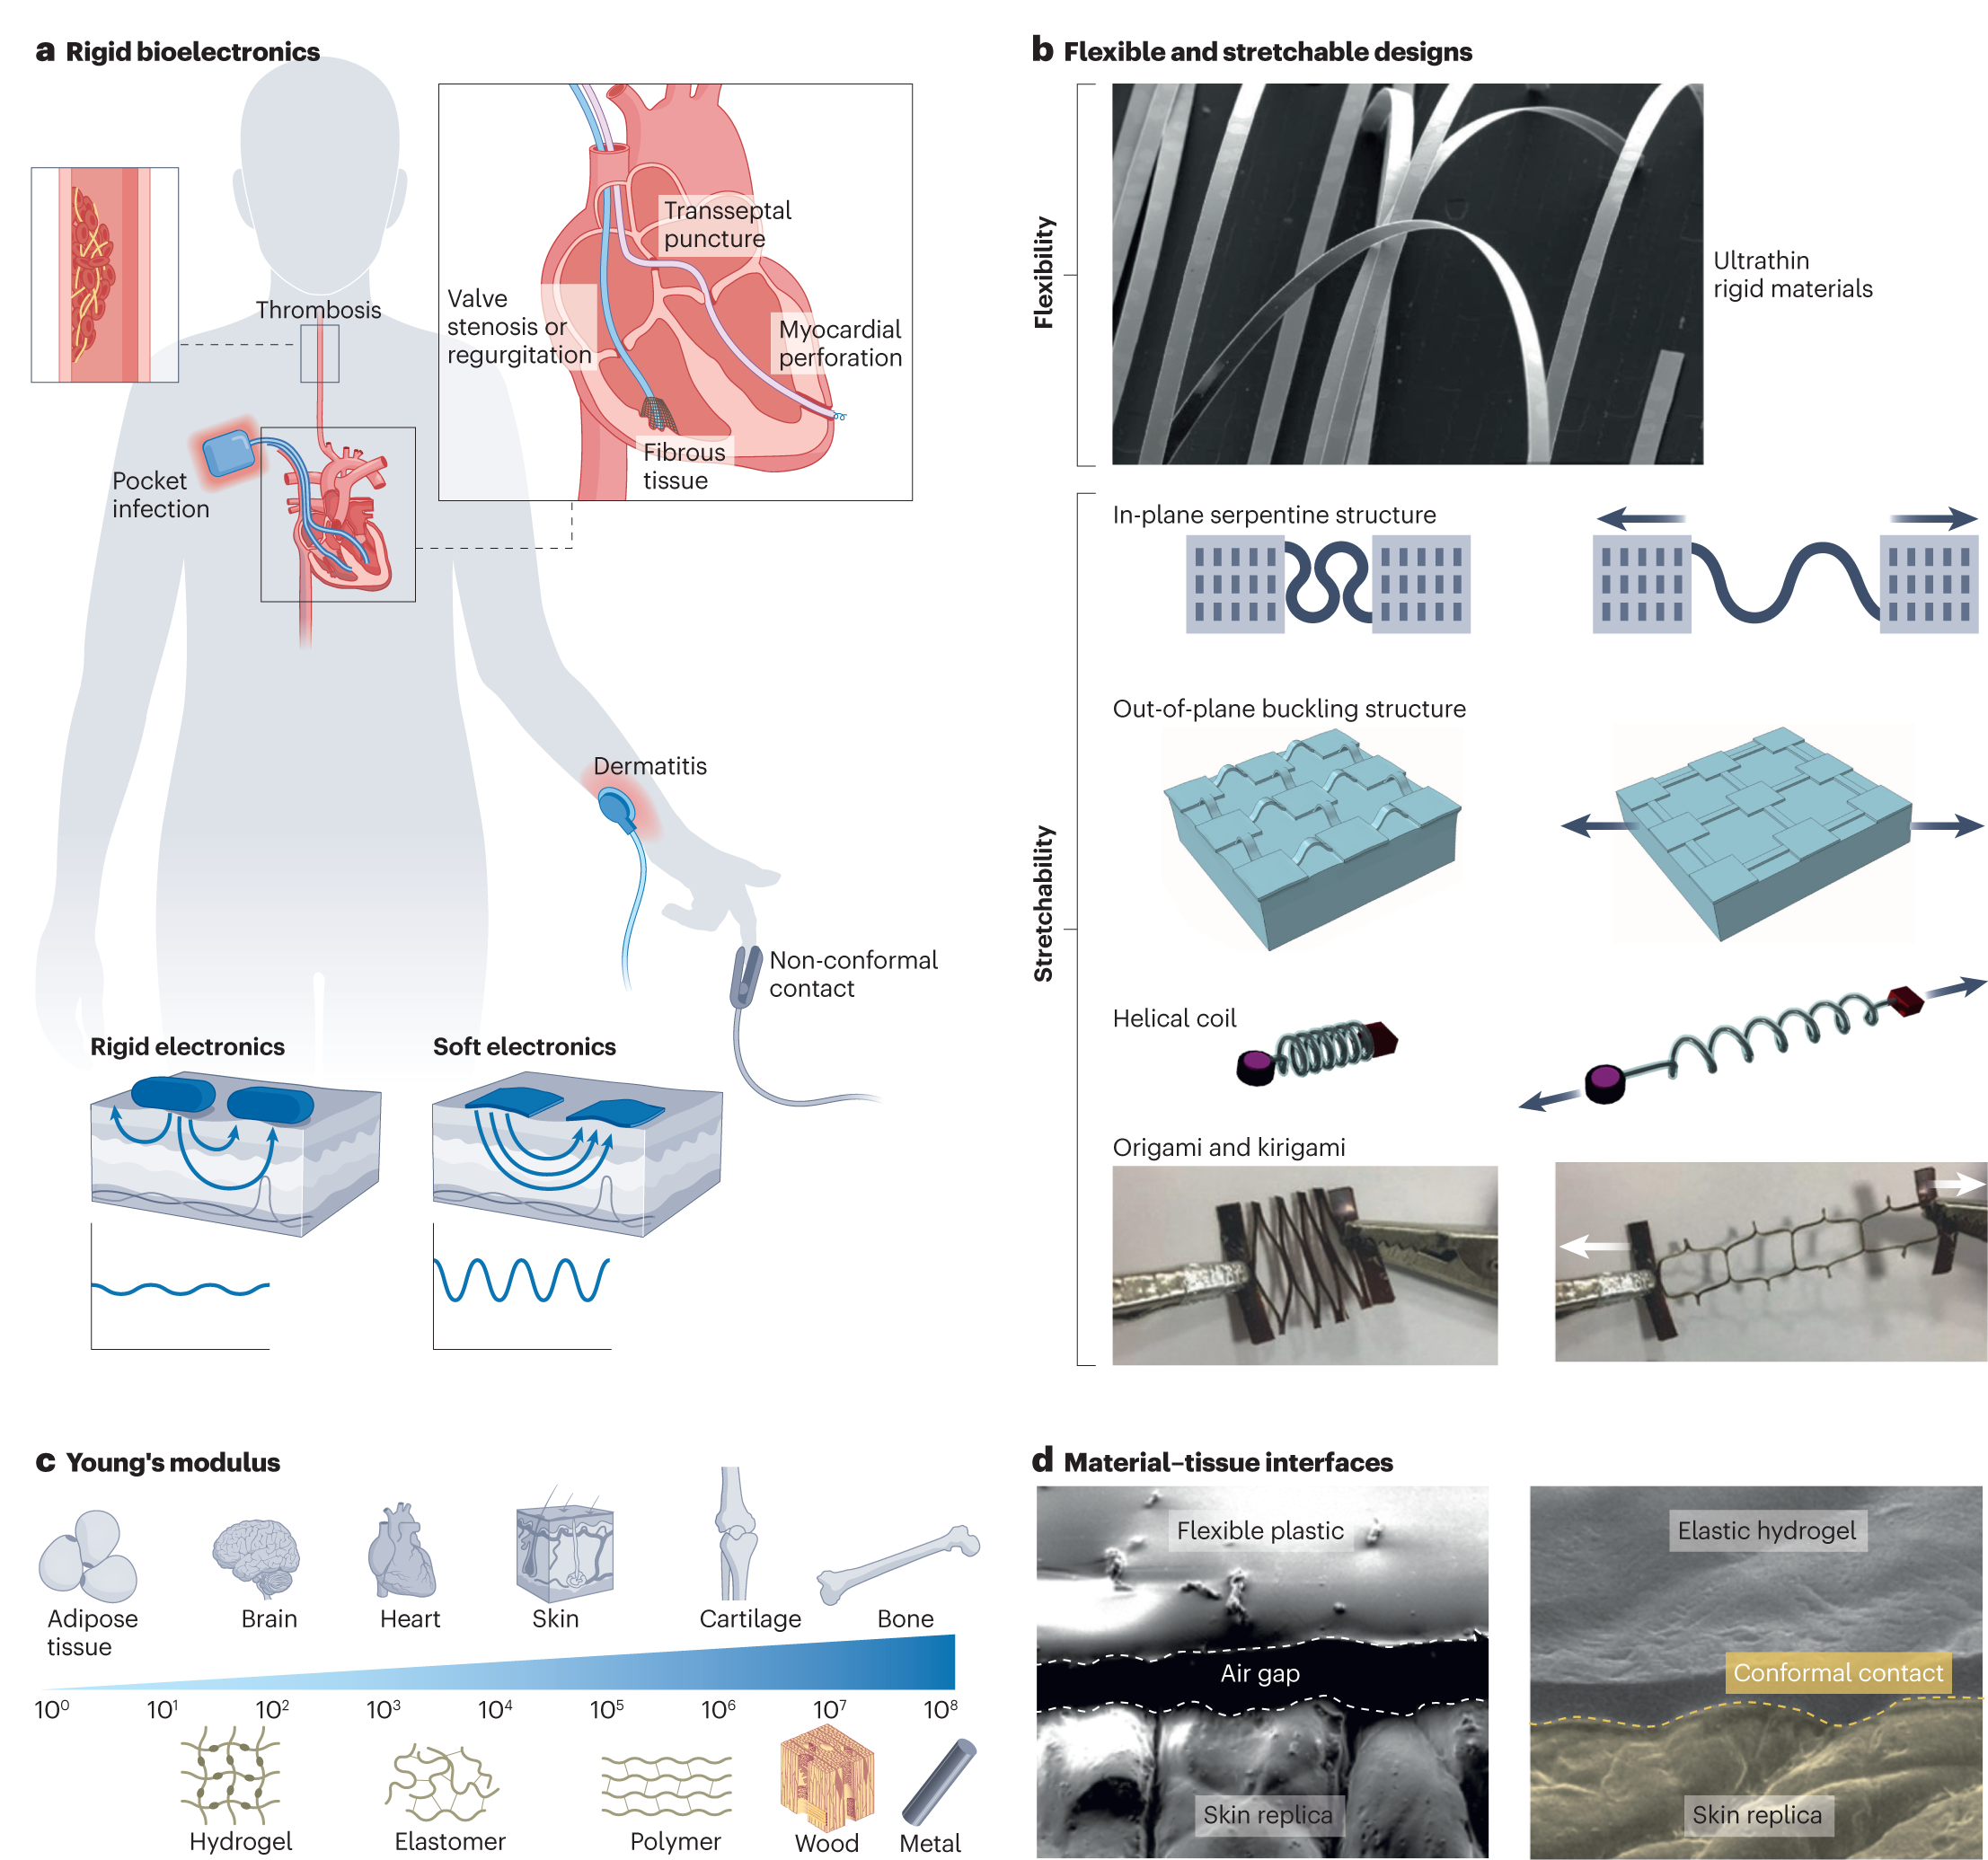 Soft bioelectronics for the management of cardiovascular diseases